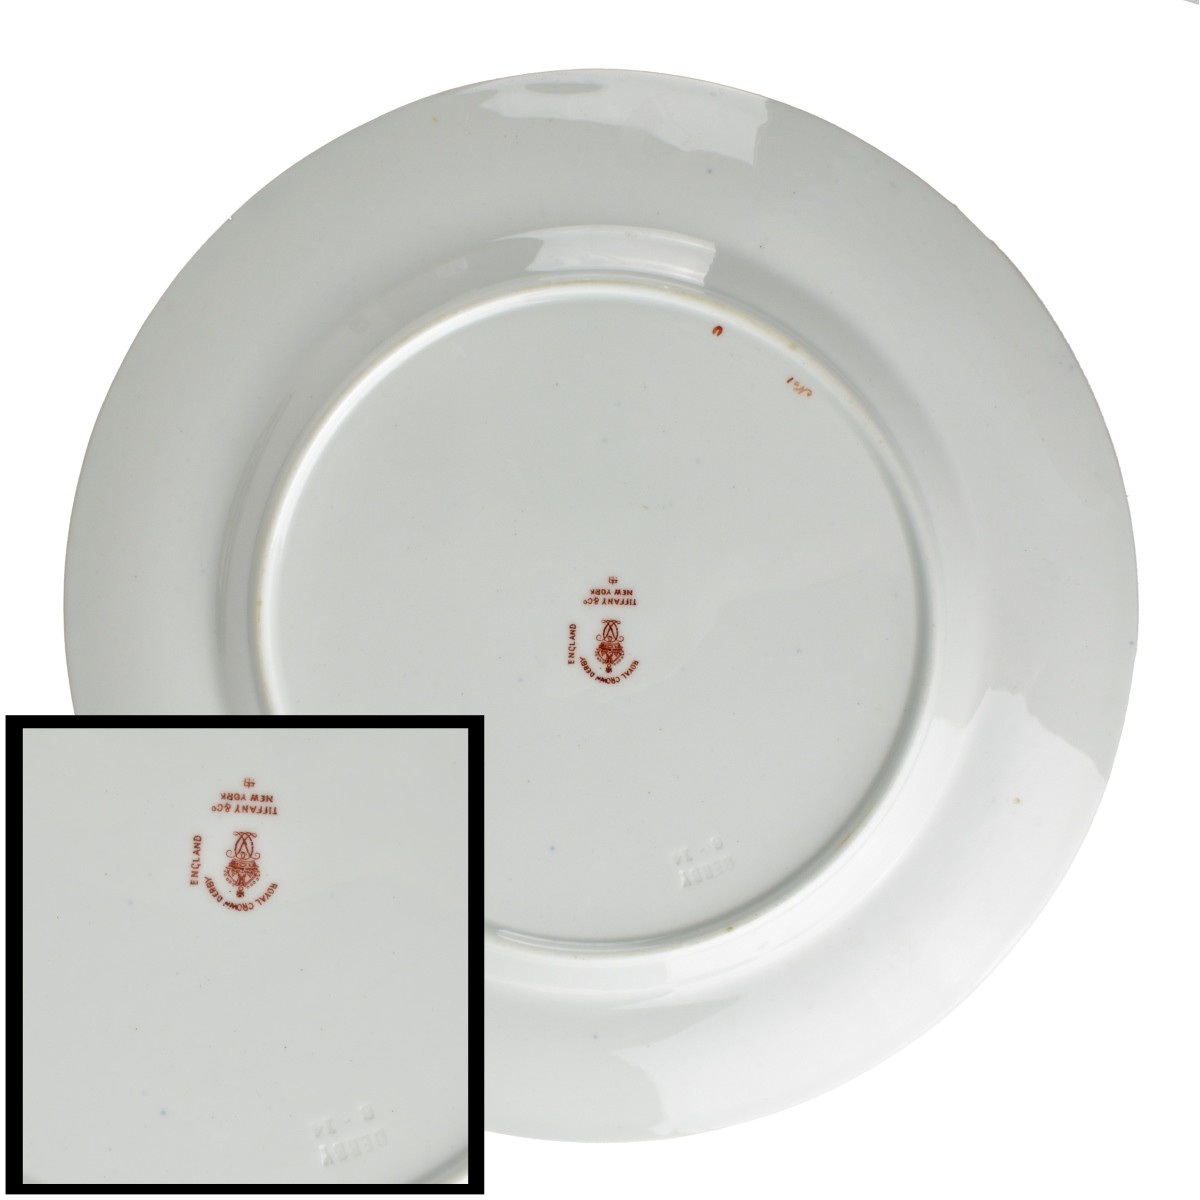 Tiffany & Co for Royal Crown Derby Plates